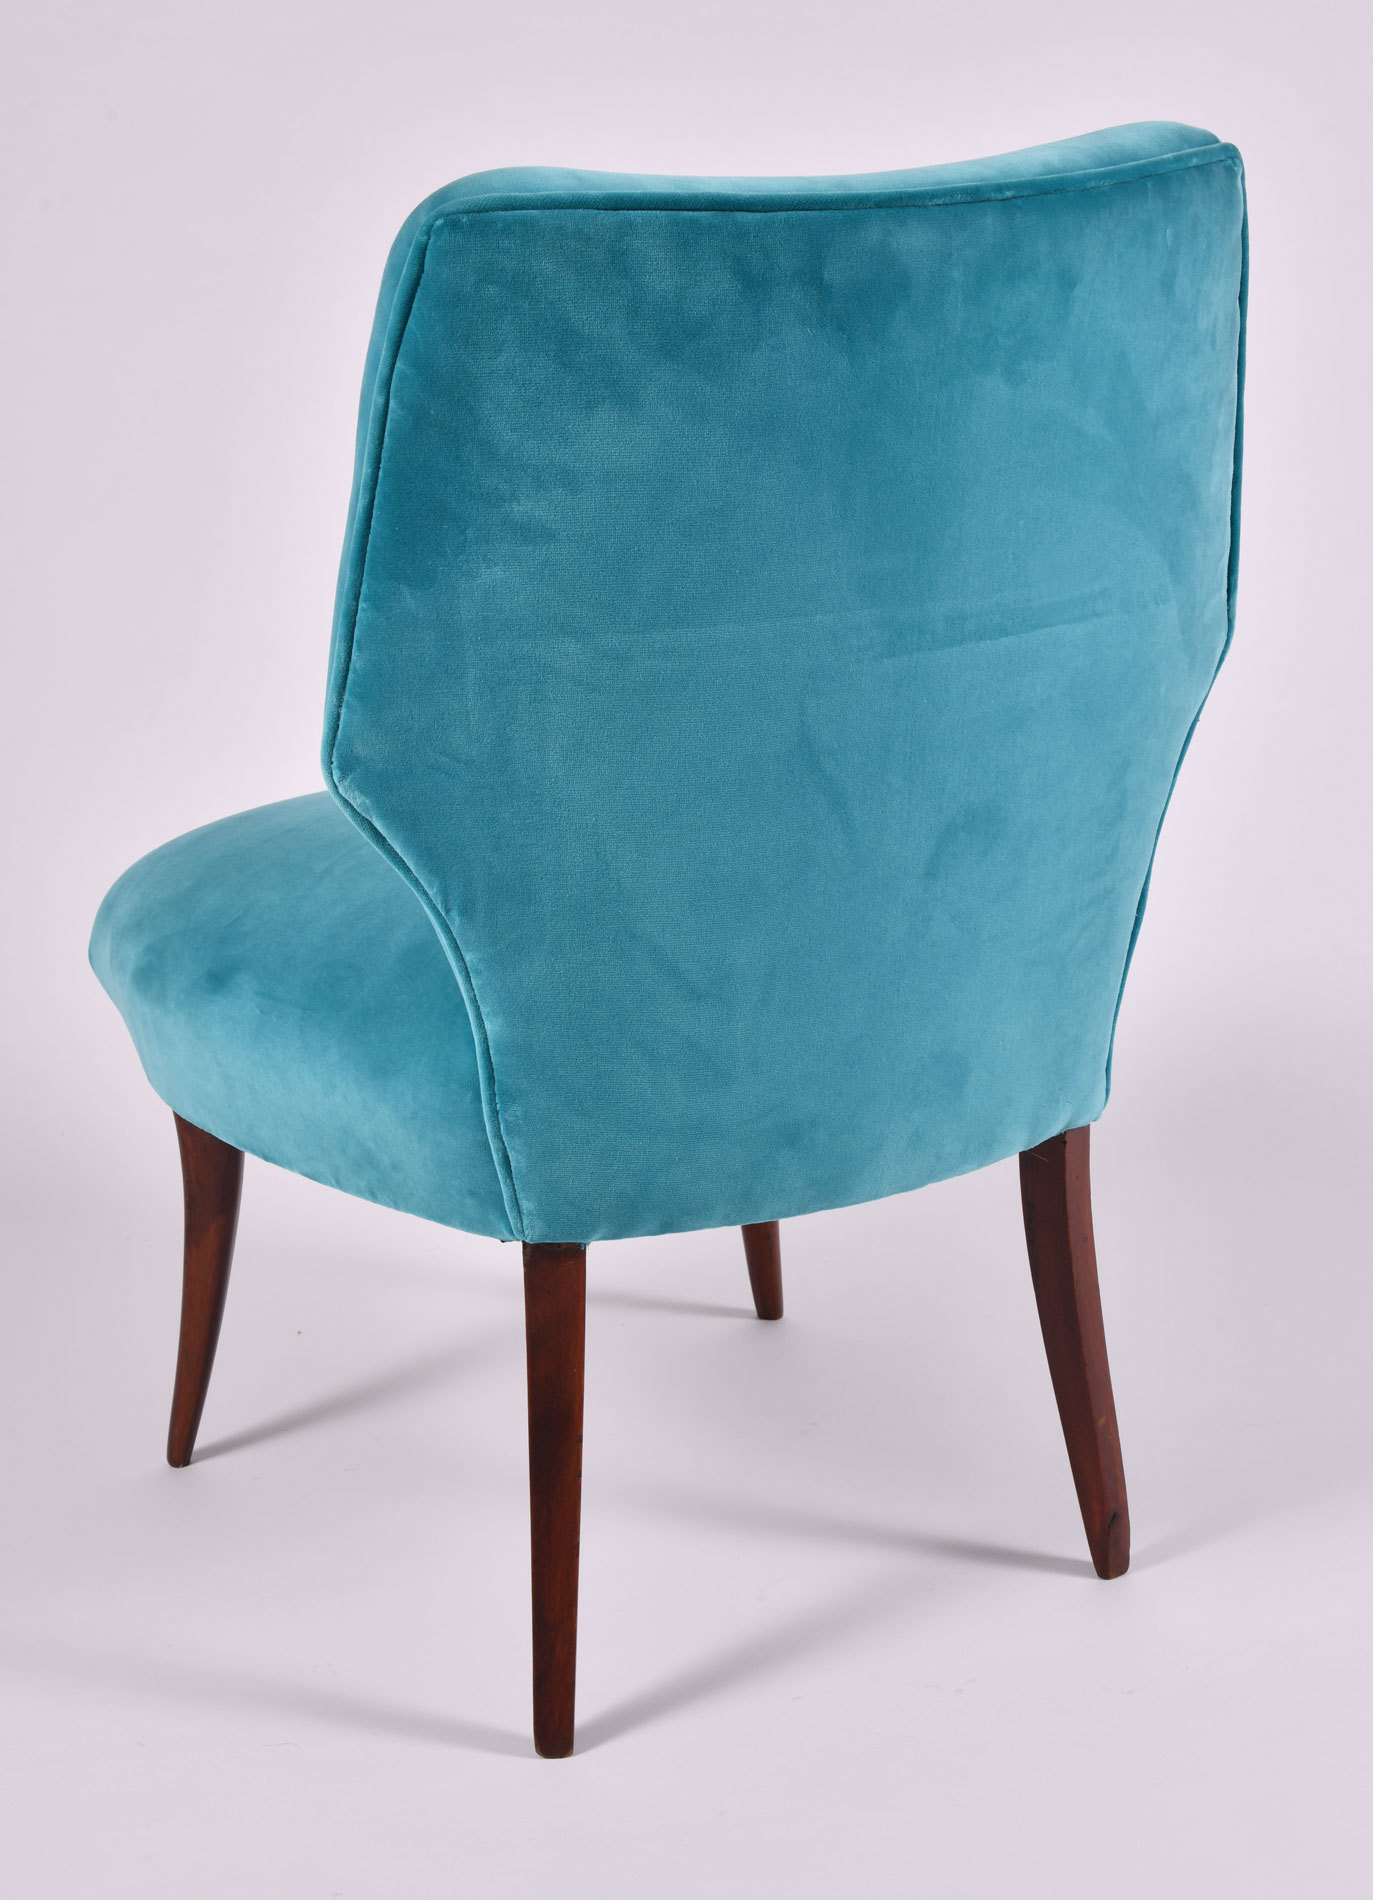 The image for Pair Turquoise Velvet Chairs 05